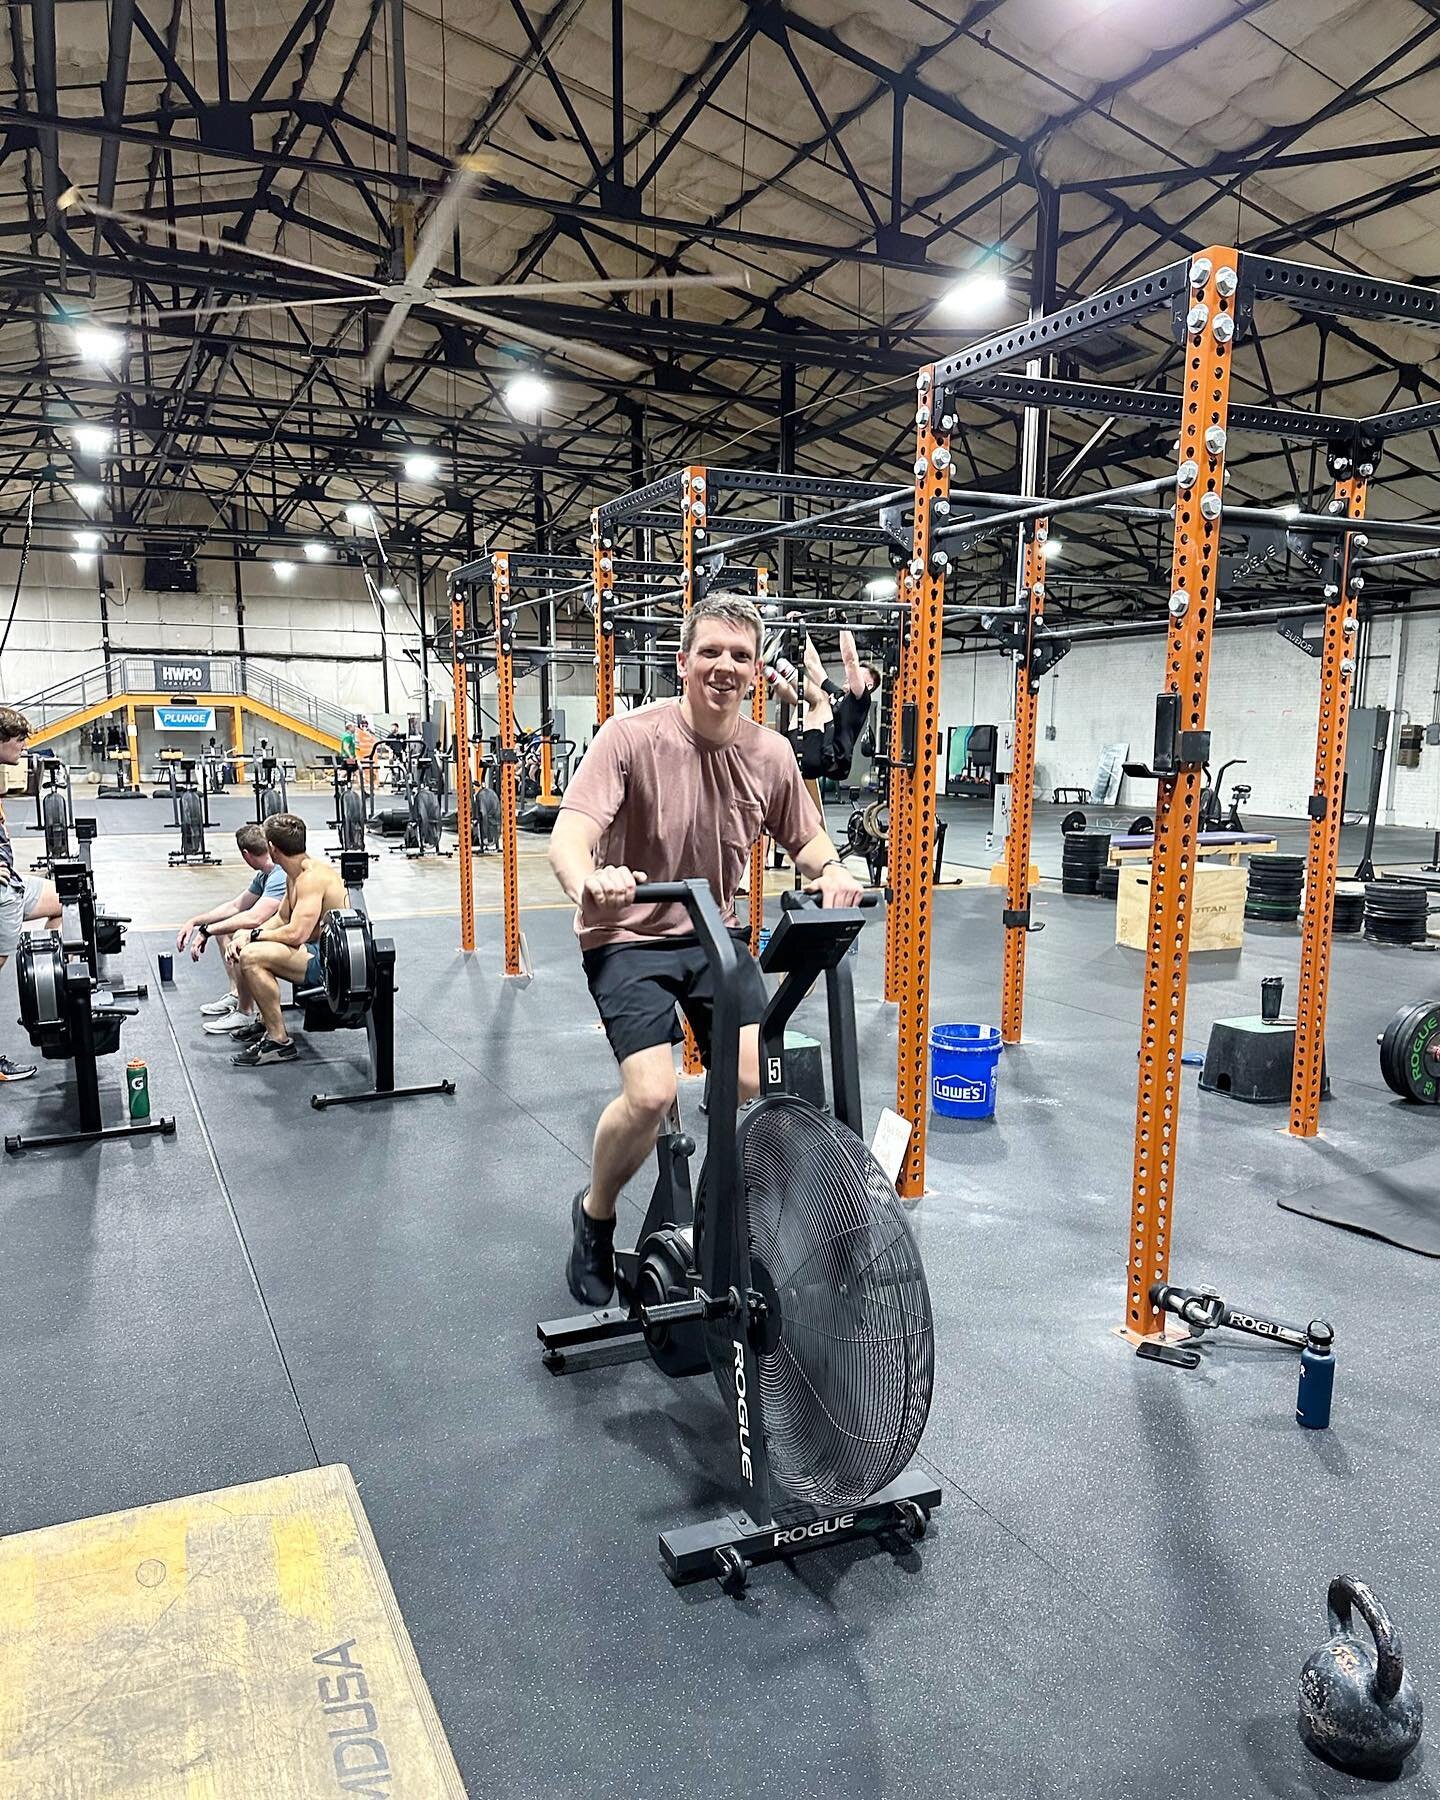 Pedaling right on into a new week! 🚴 

#sundayscaries #mondaymotivation #functionalfitness #echobike #crossfit #knoxville #visitknoxville